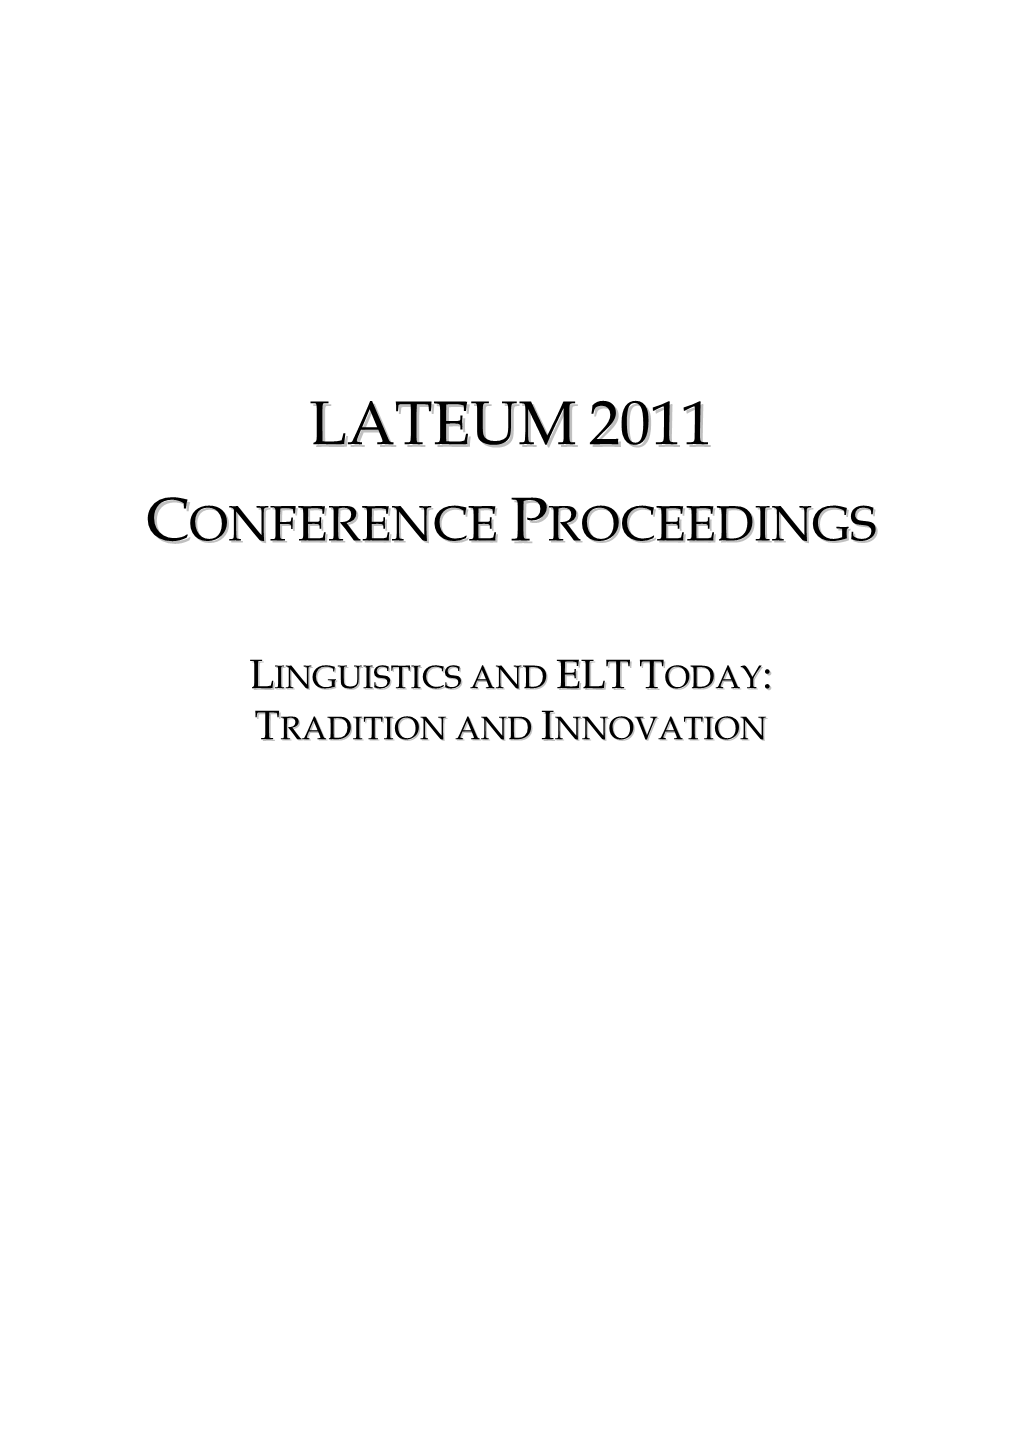 Lateum 2011 Conference Proceedings